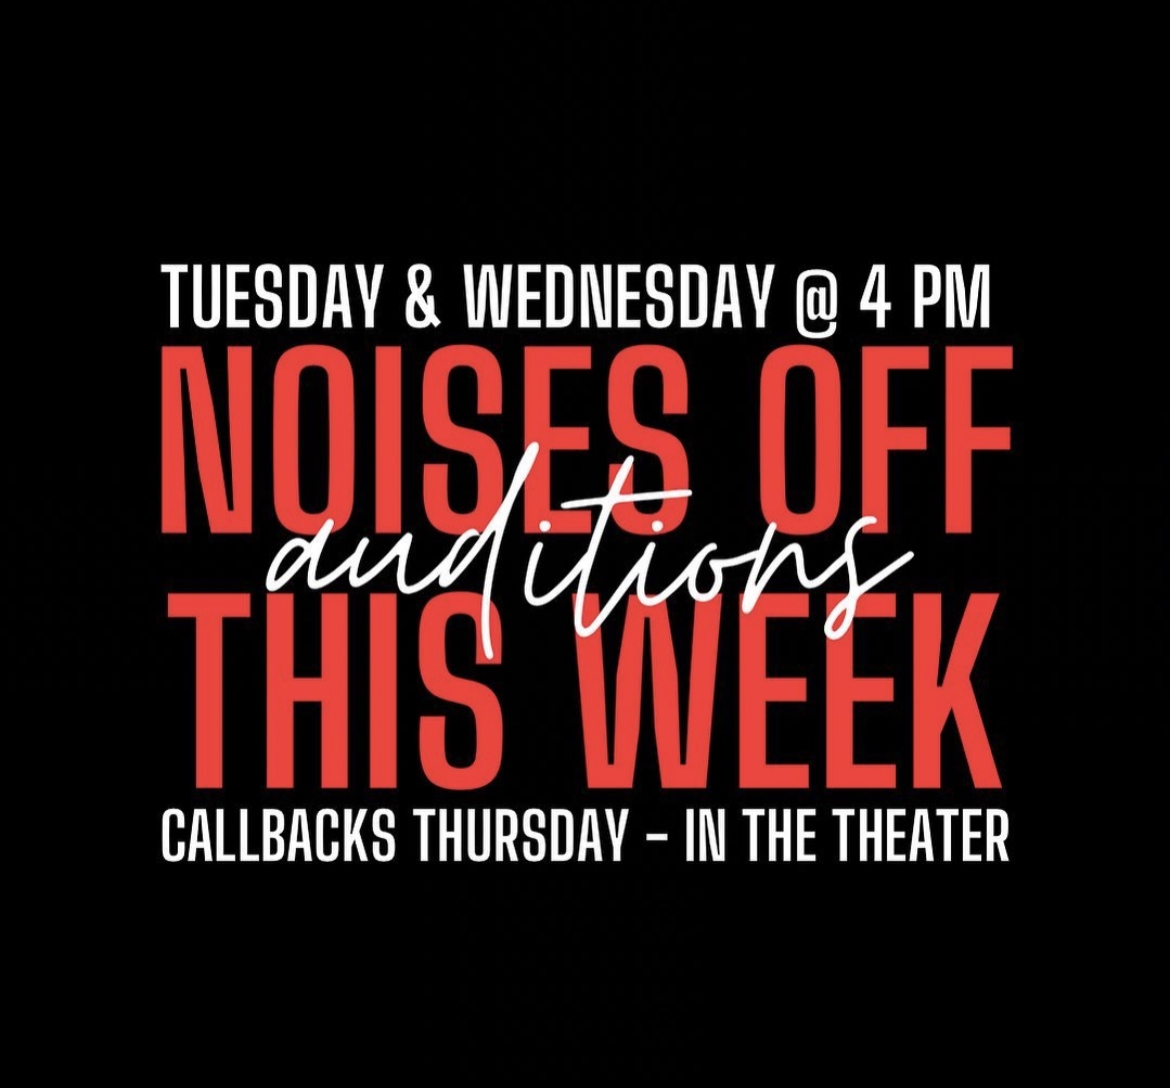 Fall play “Noises Off” Auditions are Today and Tomorrow